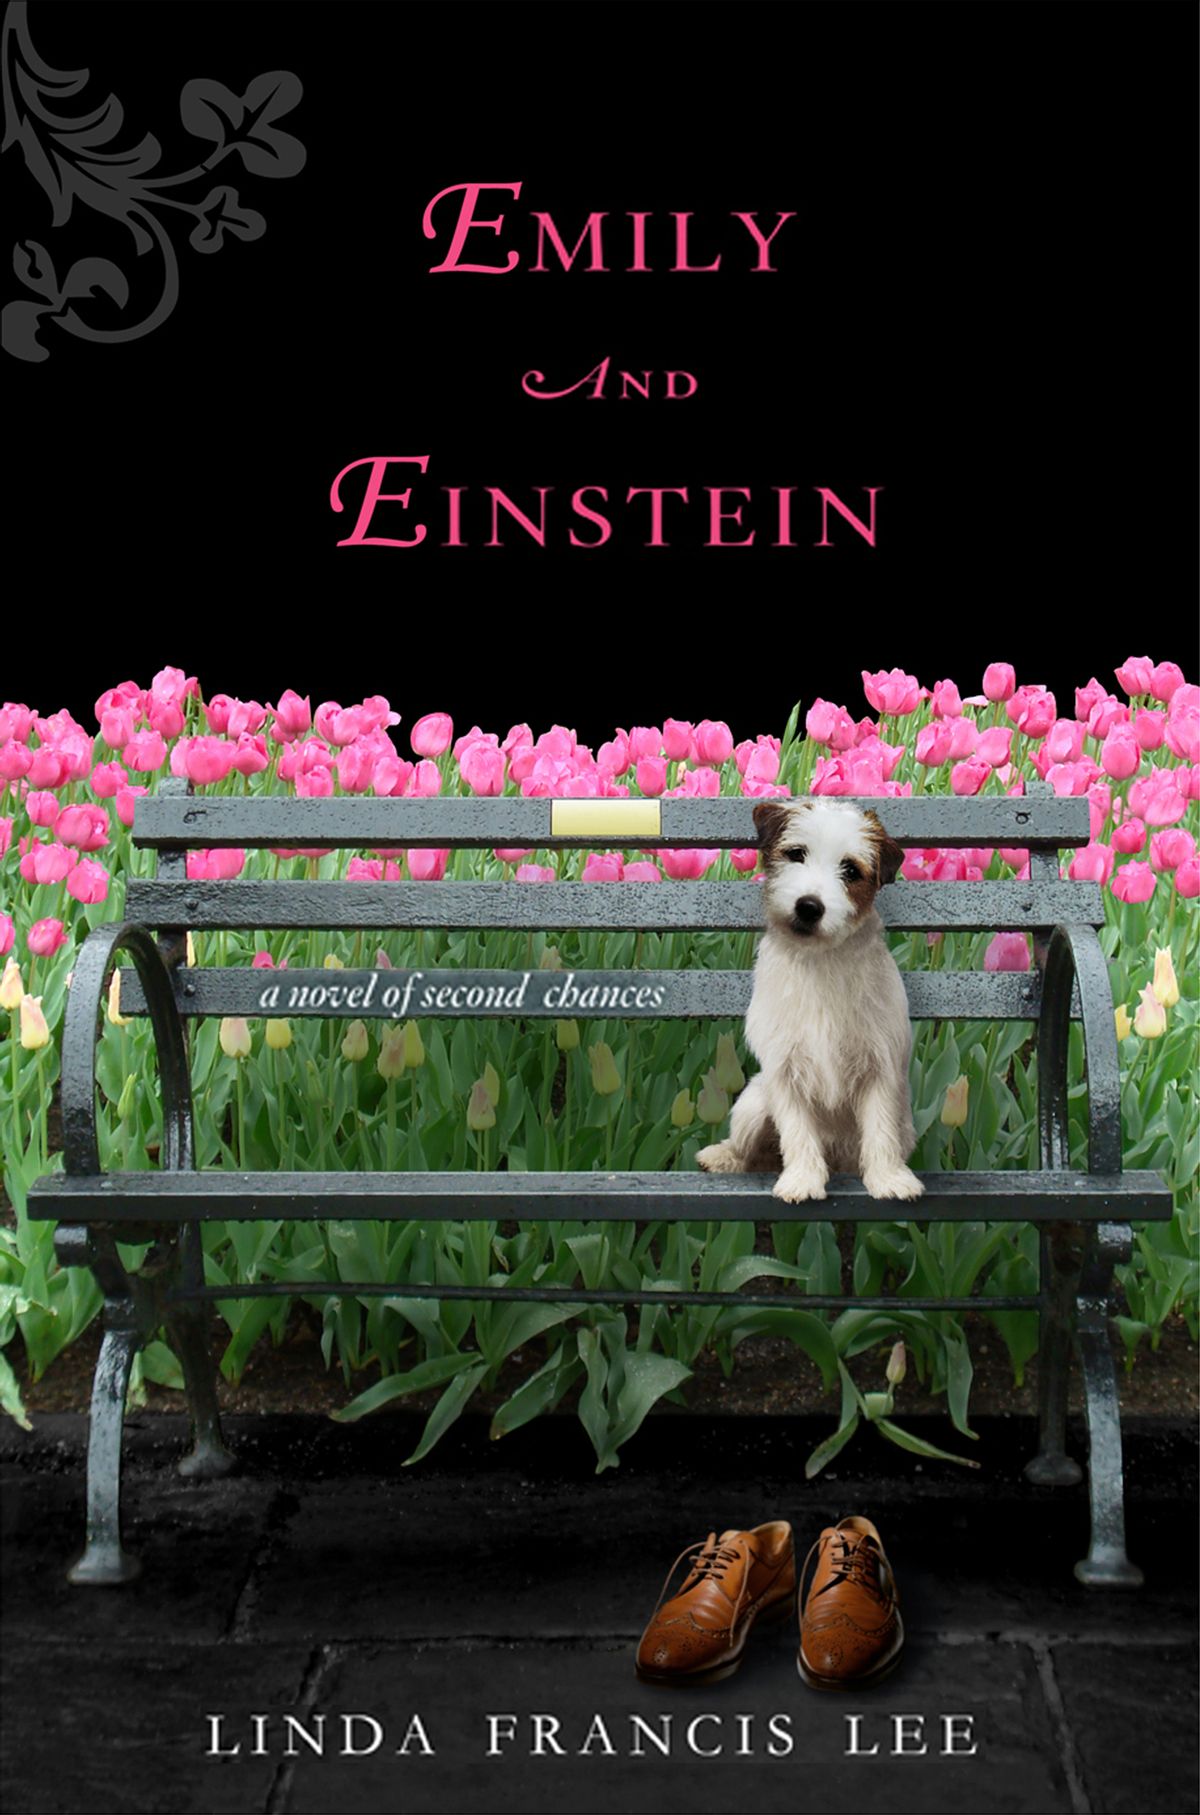 "Emily and Einstein" by Linda Francis Lee 